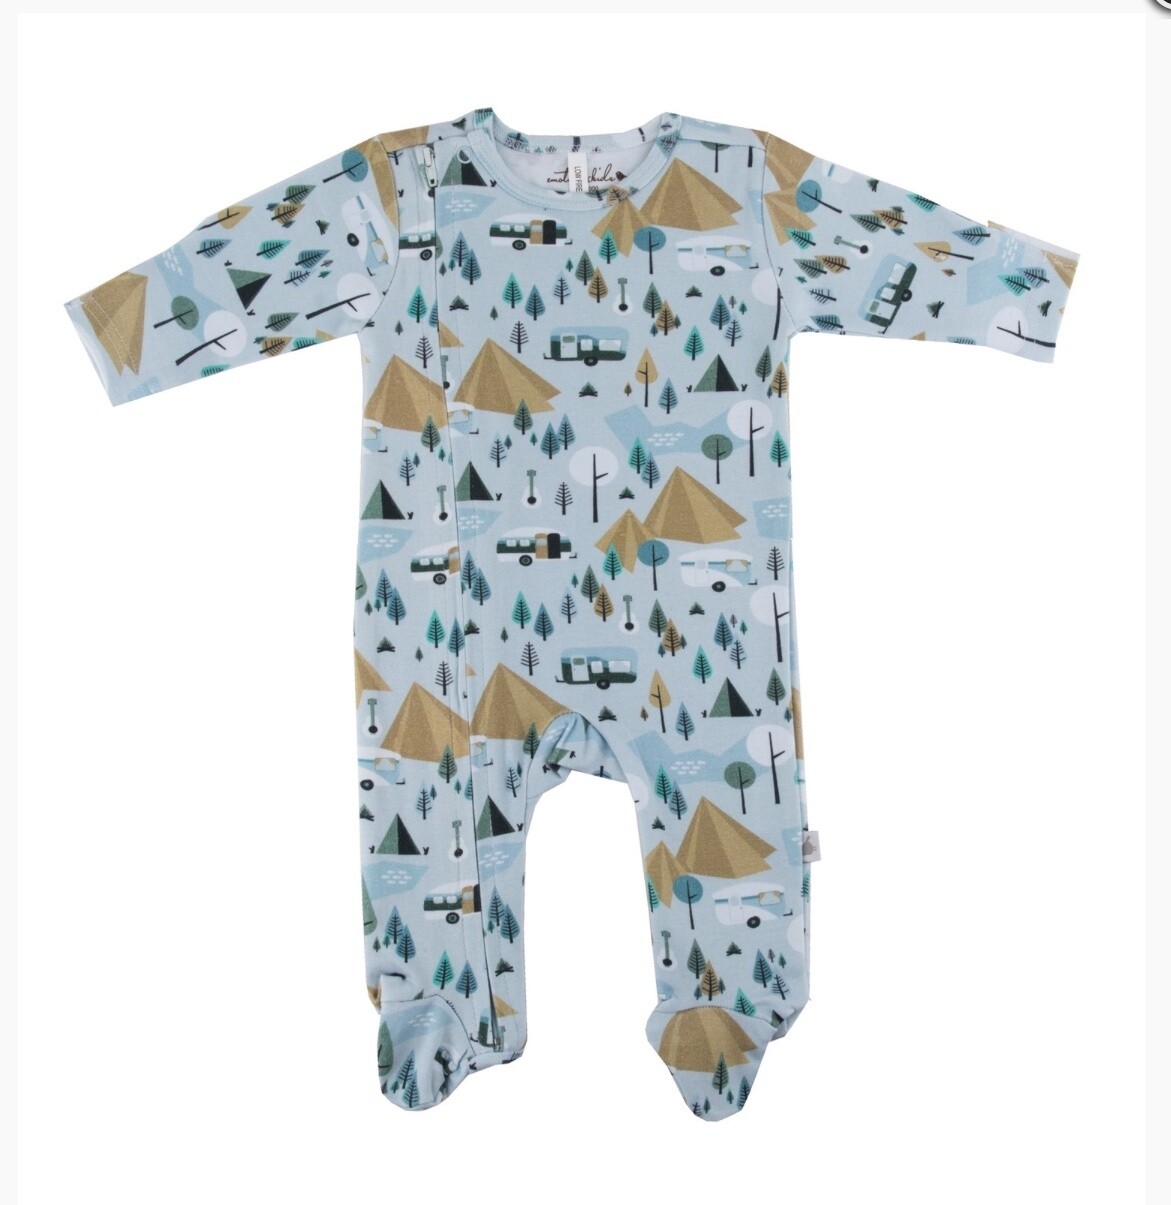 EMOTION & KIDS - Outfit with feet (0-3 Months) - Retro Camping